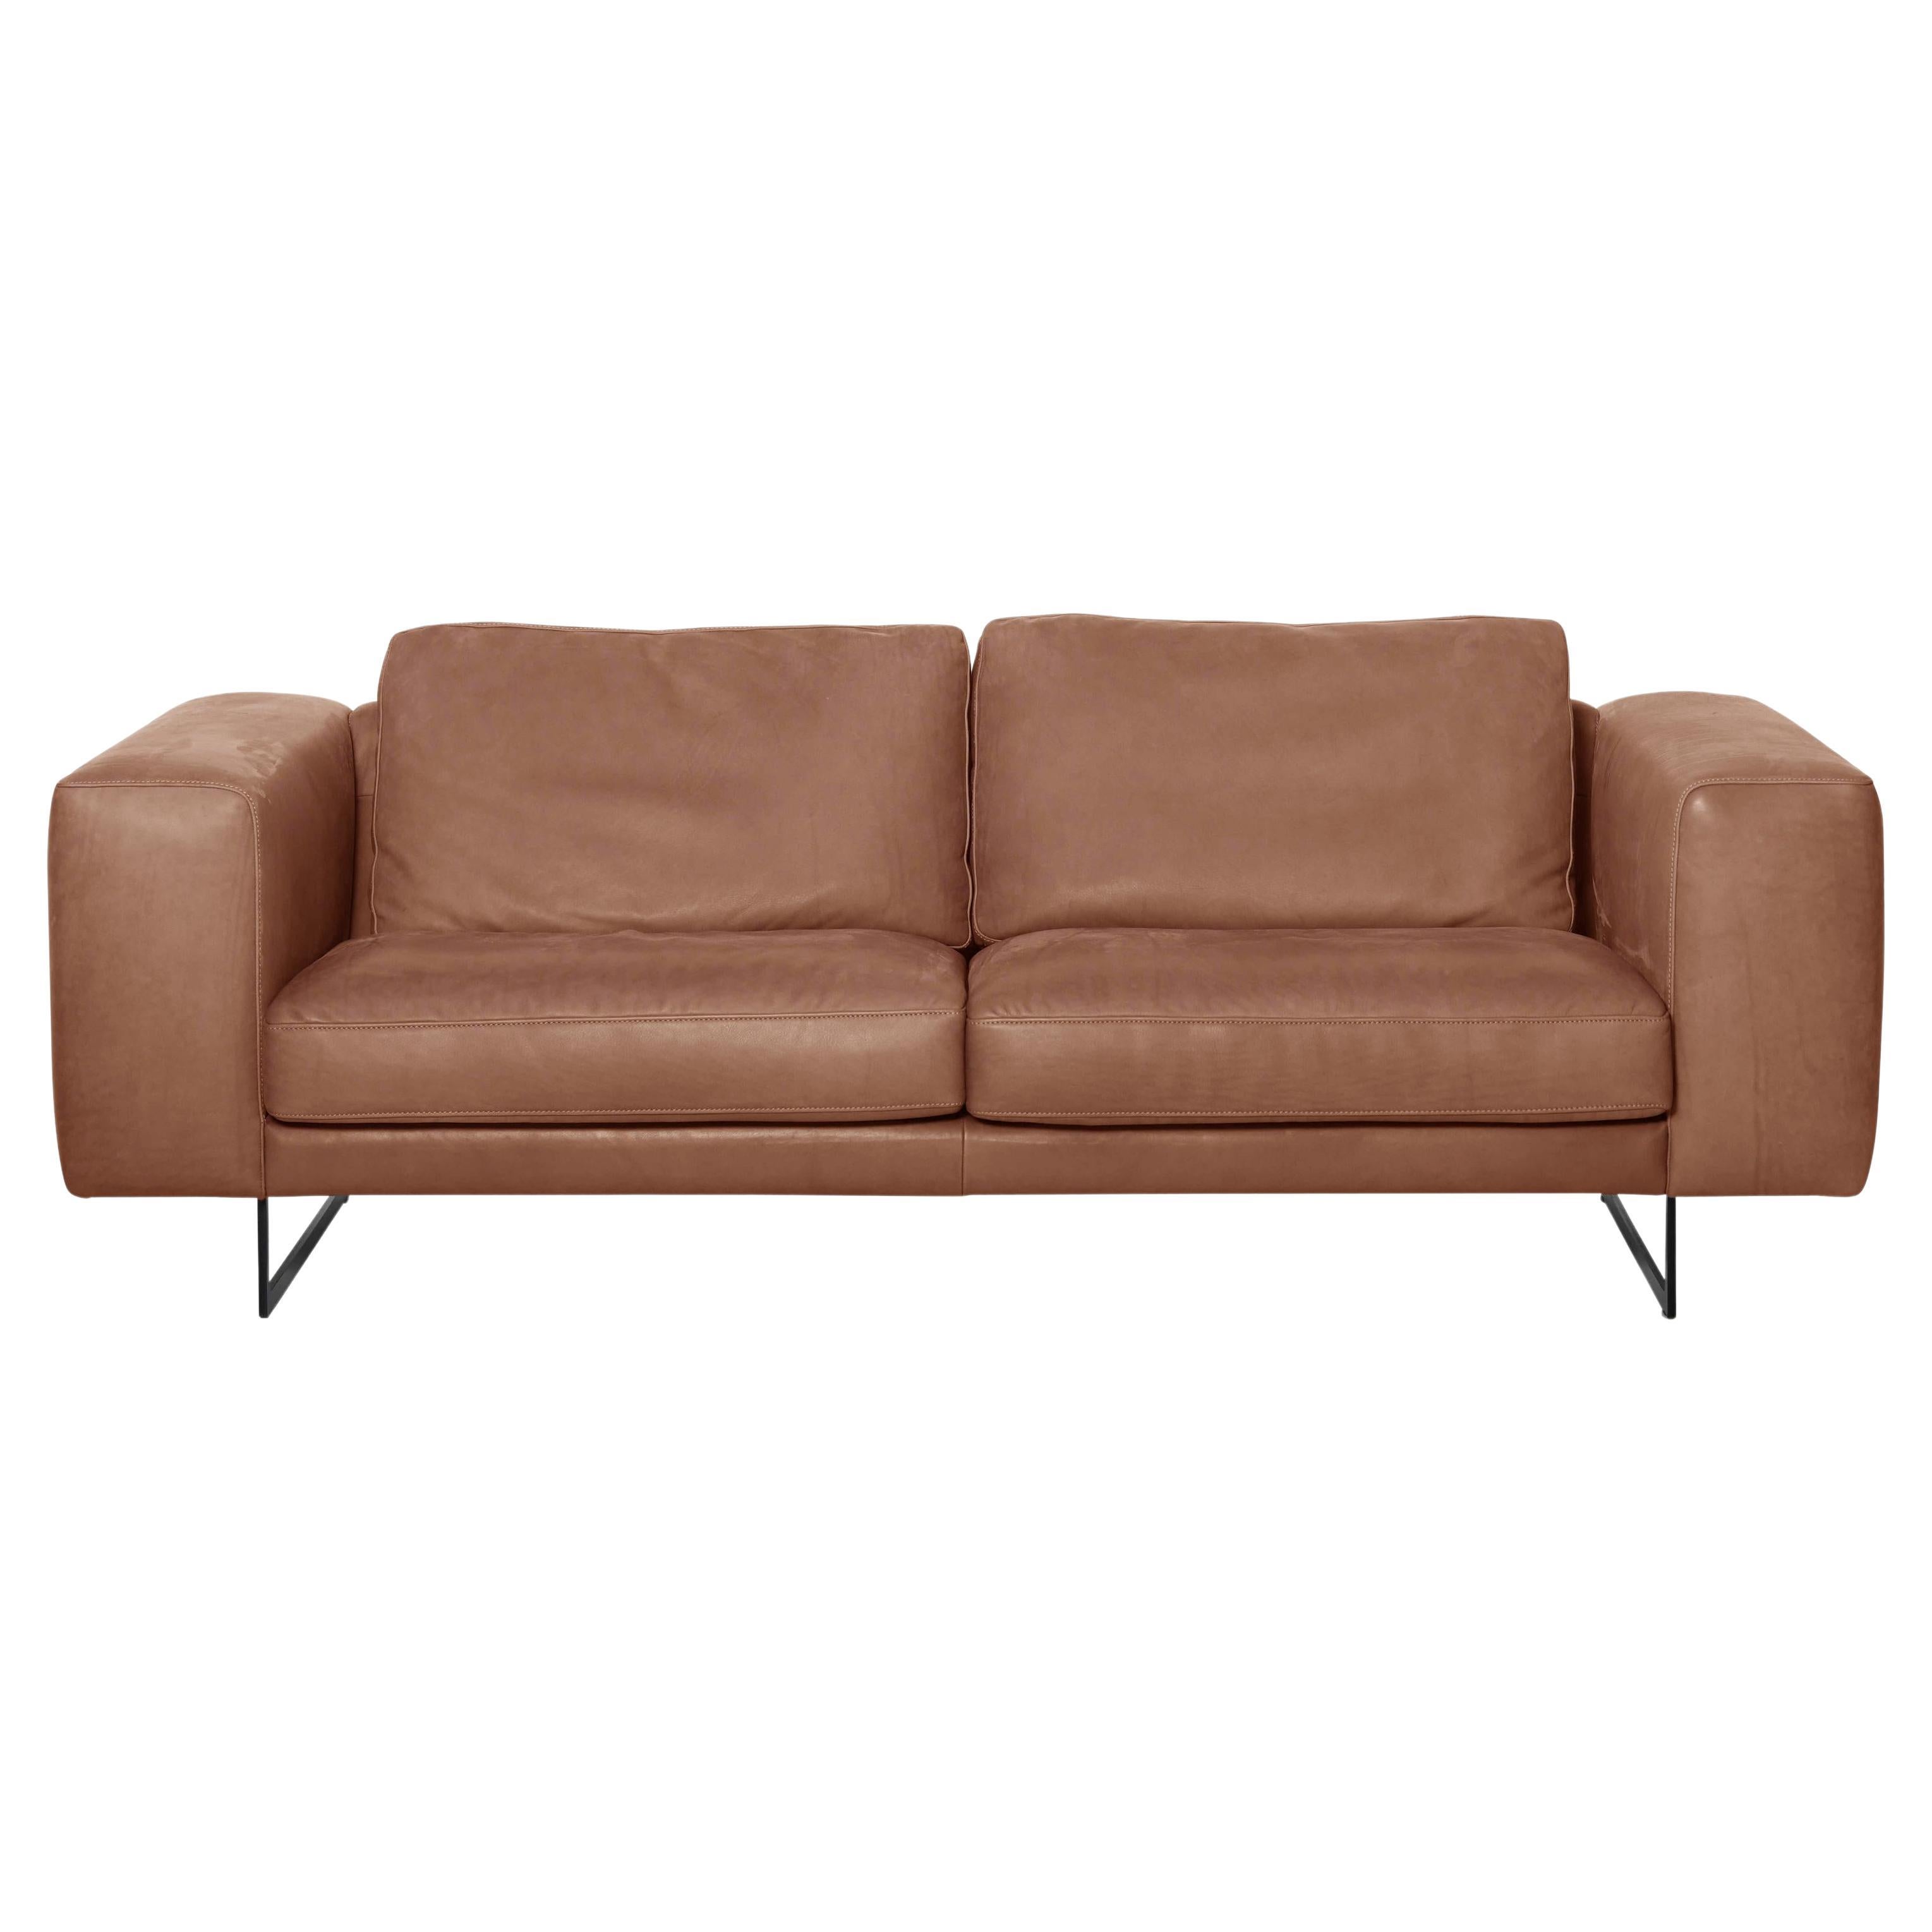 De Sede DS-748 Large Two-Seat Sofa in Nougat Upholstery by Claudio Bellini For Sale